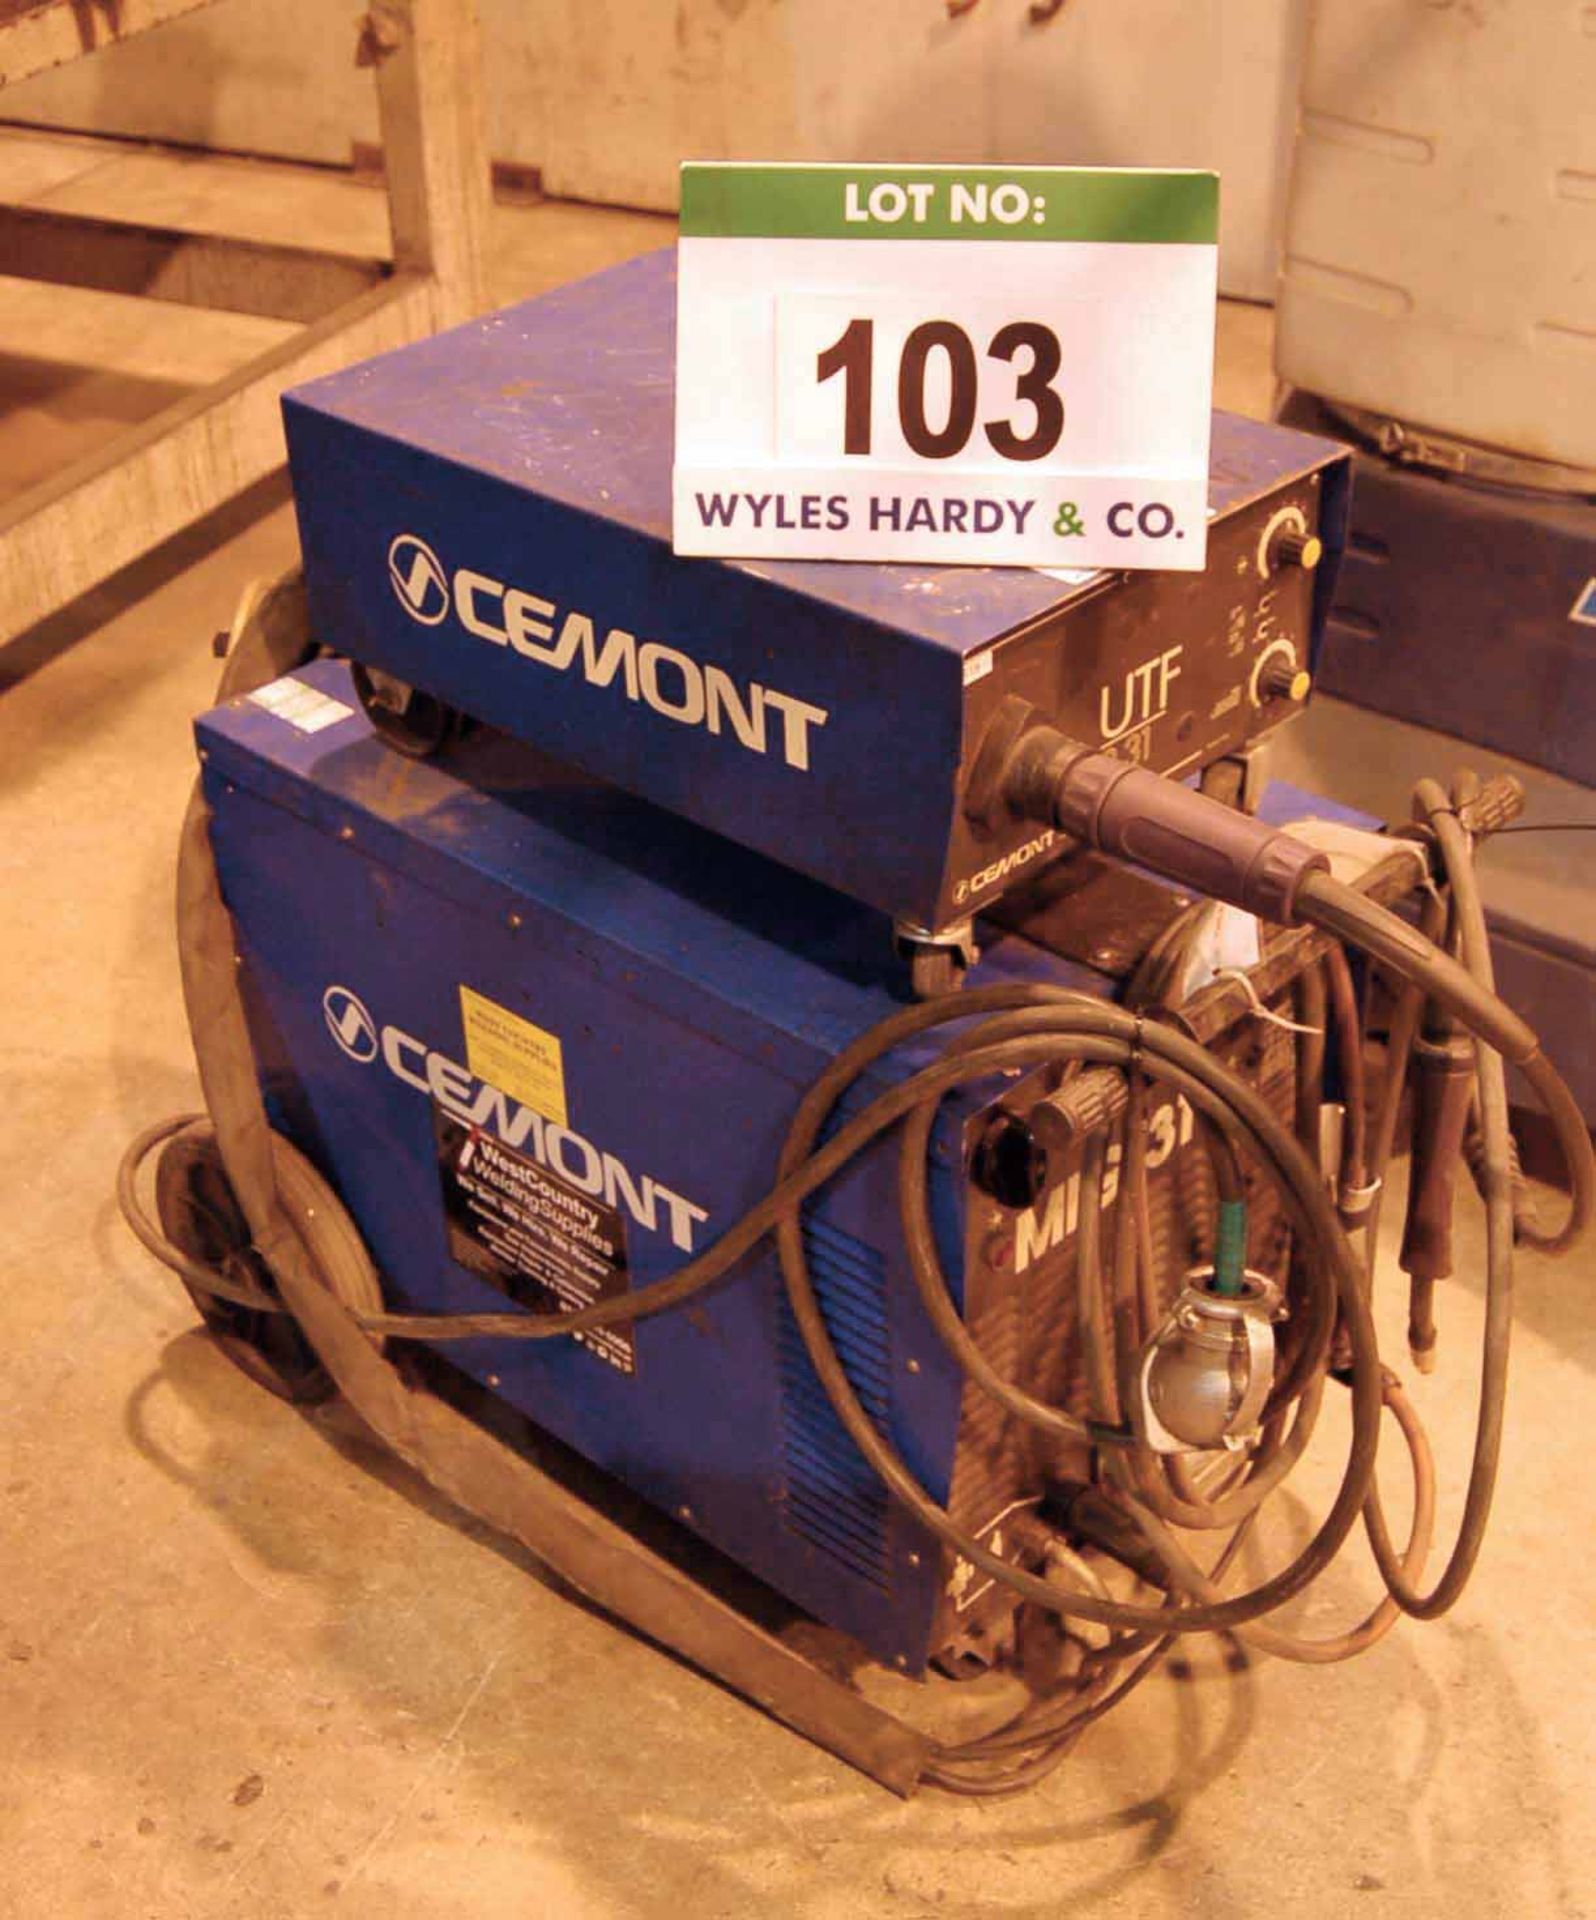 A CEMONT Mig 31 300-Amp Mig Welding Power Transformer, Serial No. TH782684 with A CEMONT UTF 2.31